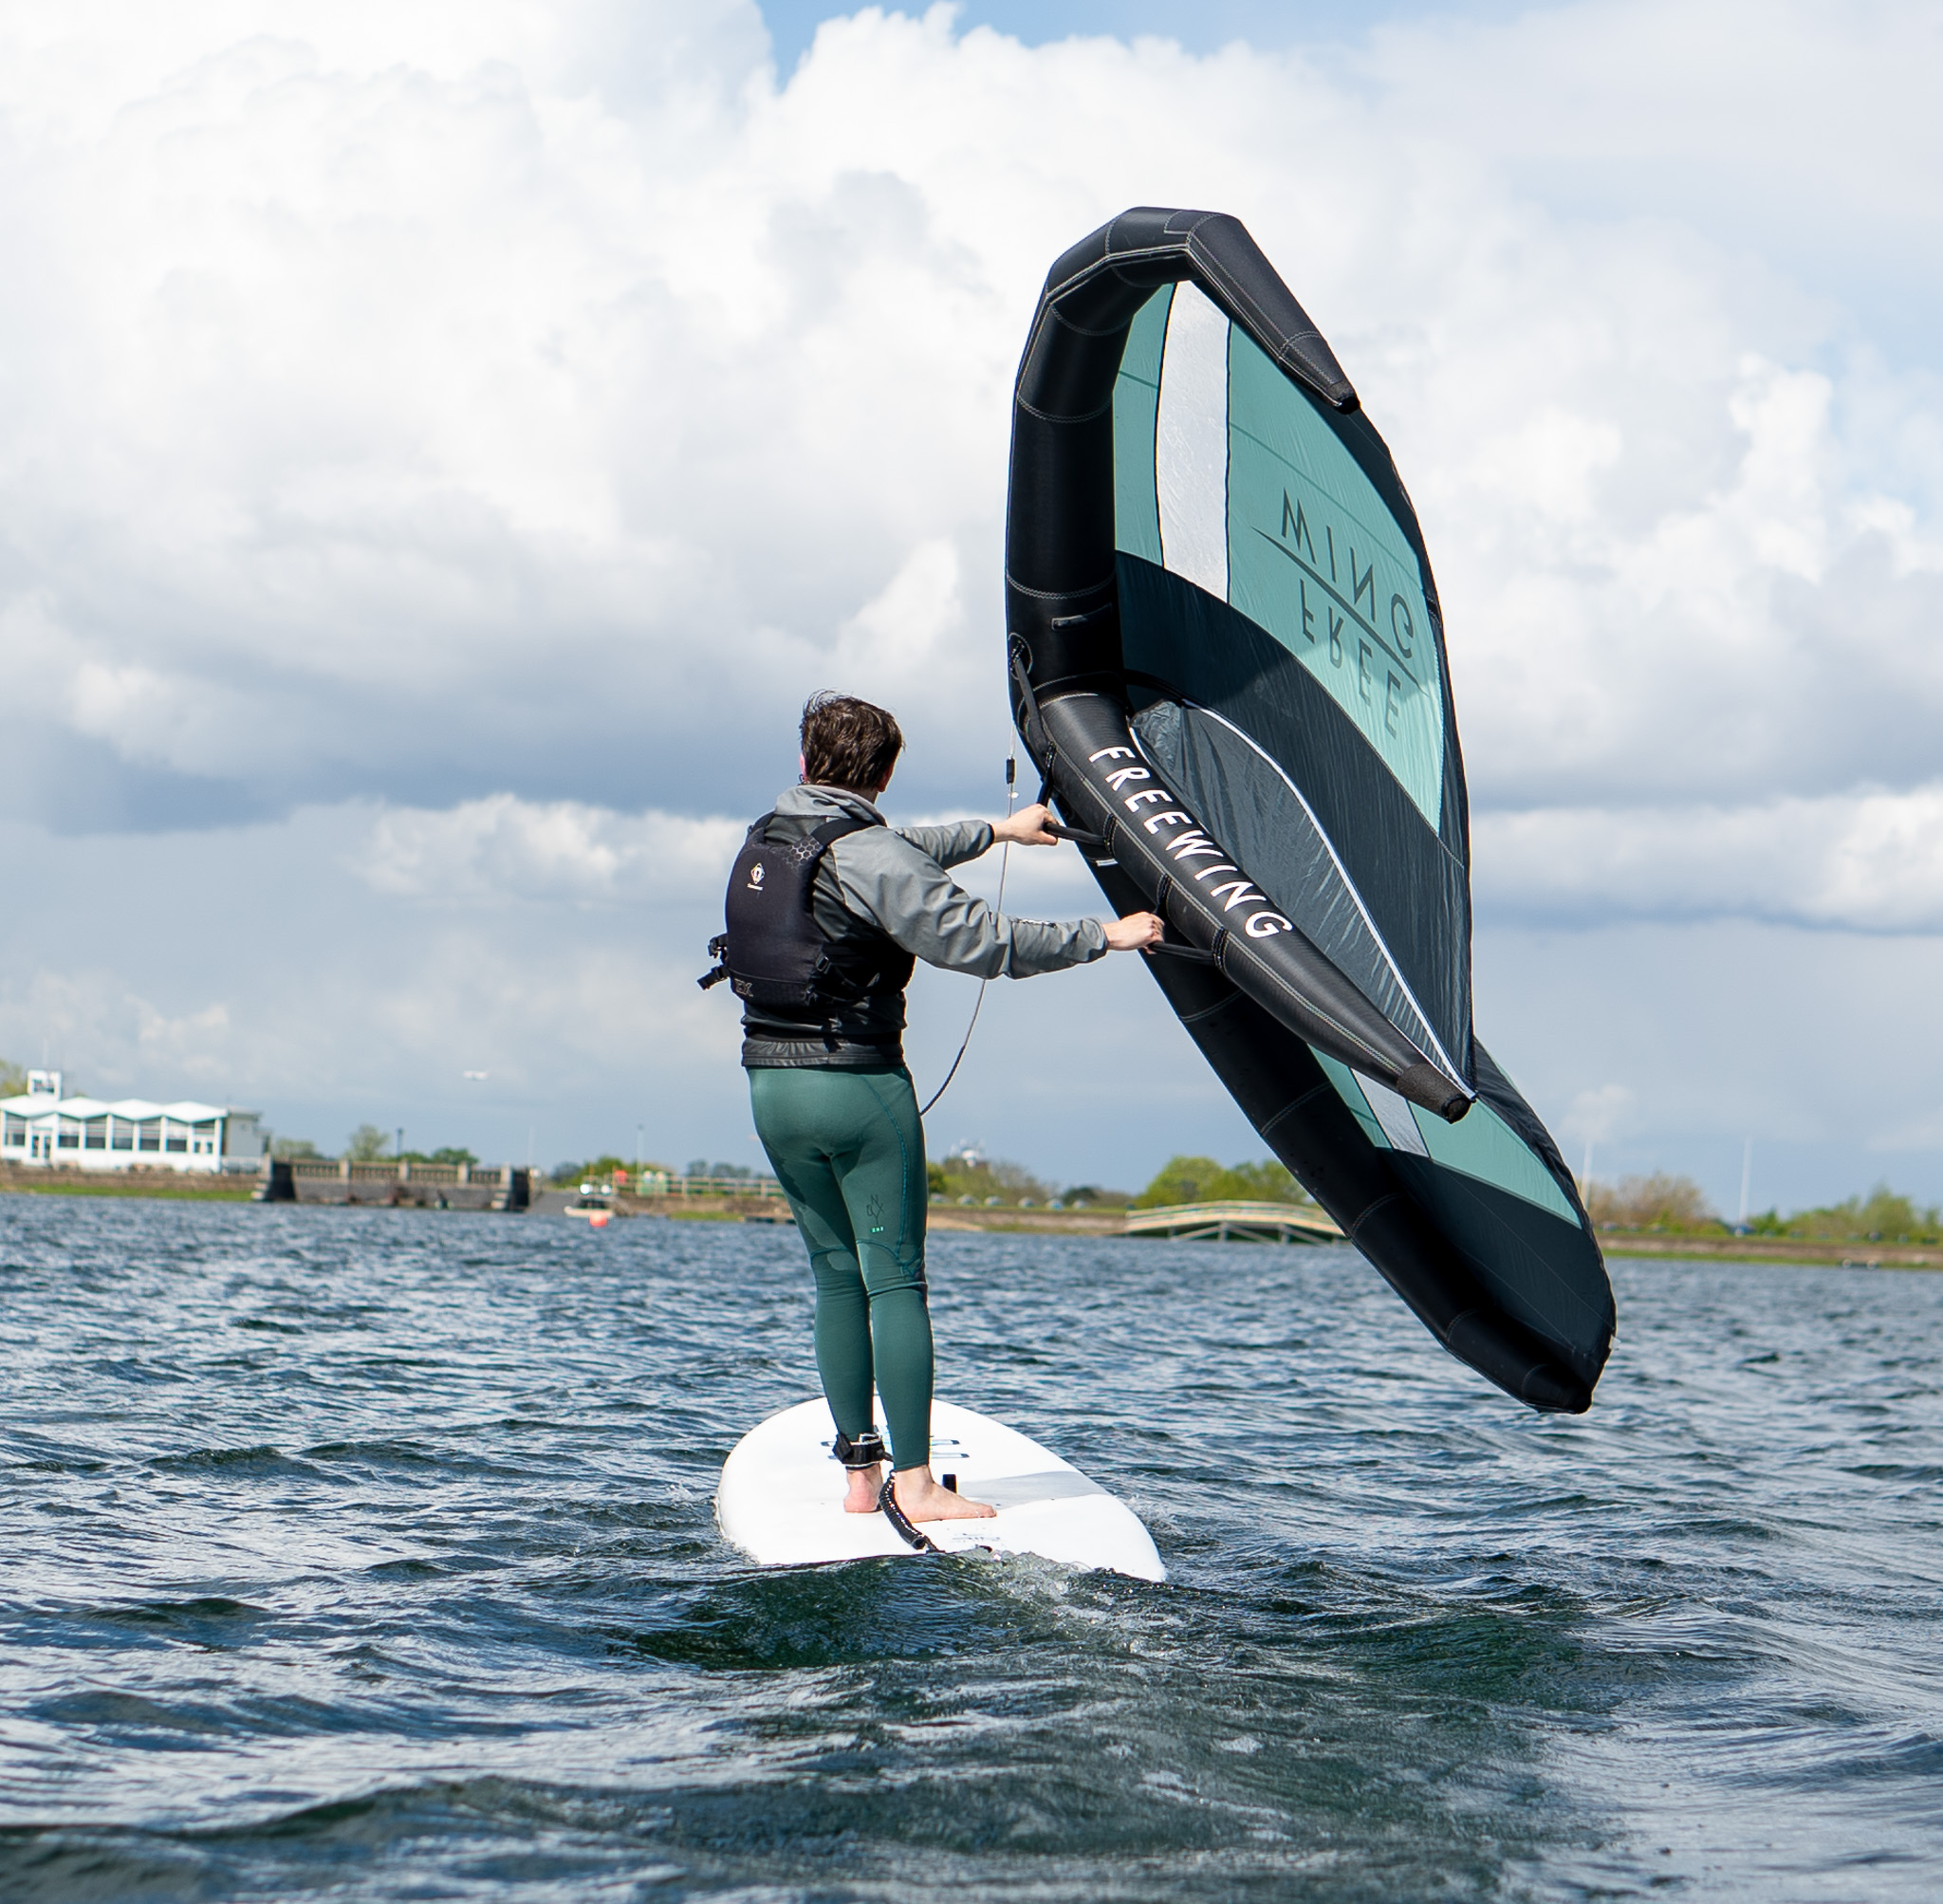 Adult Wingsurfing class